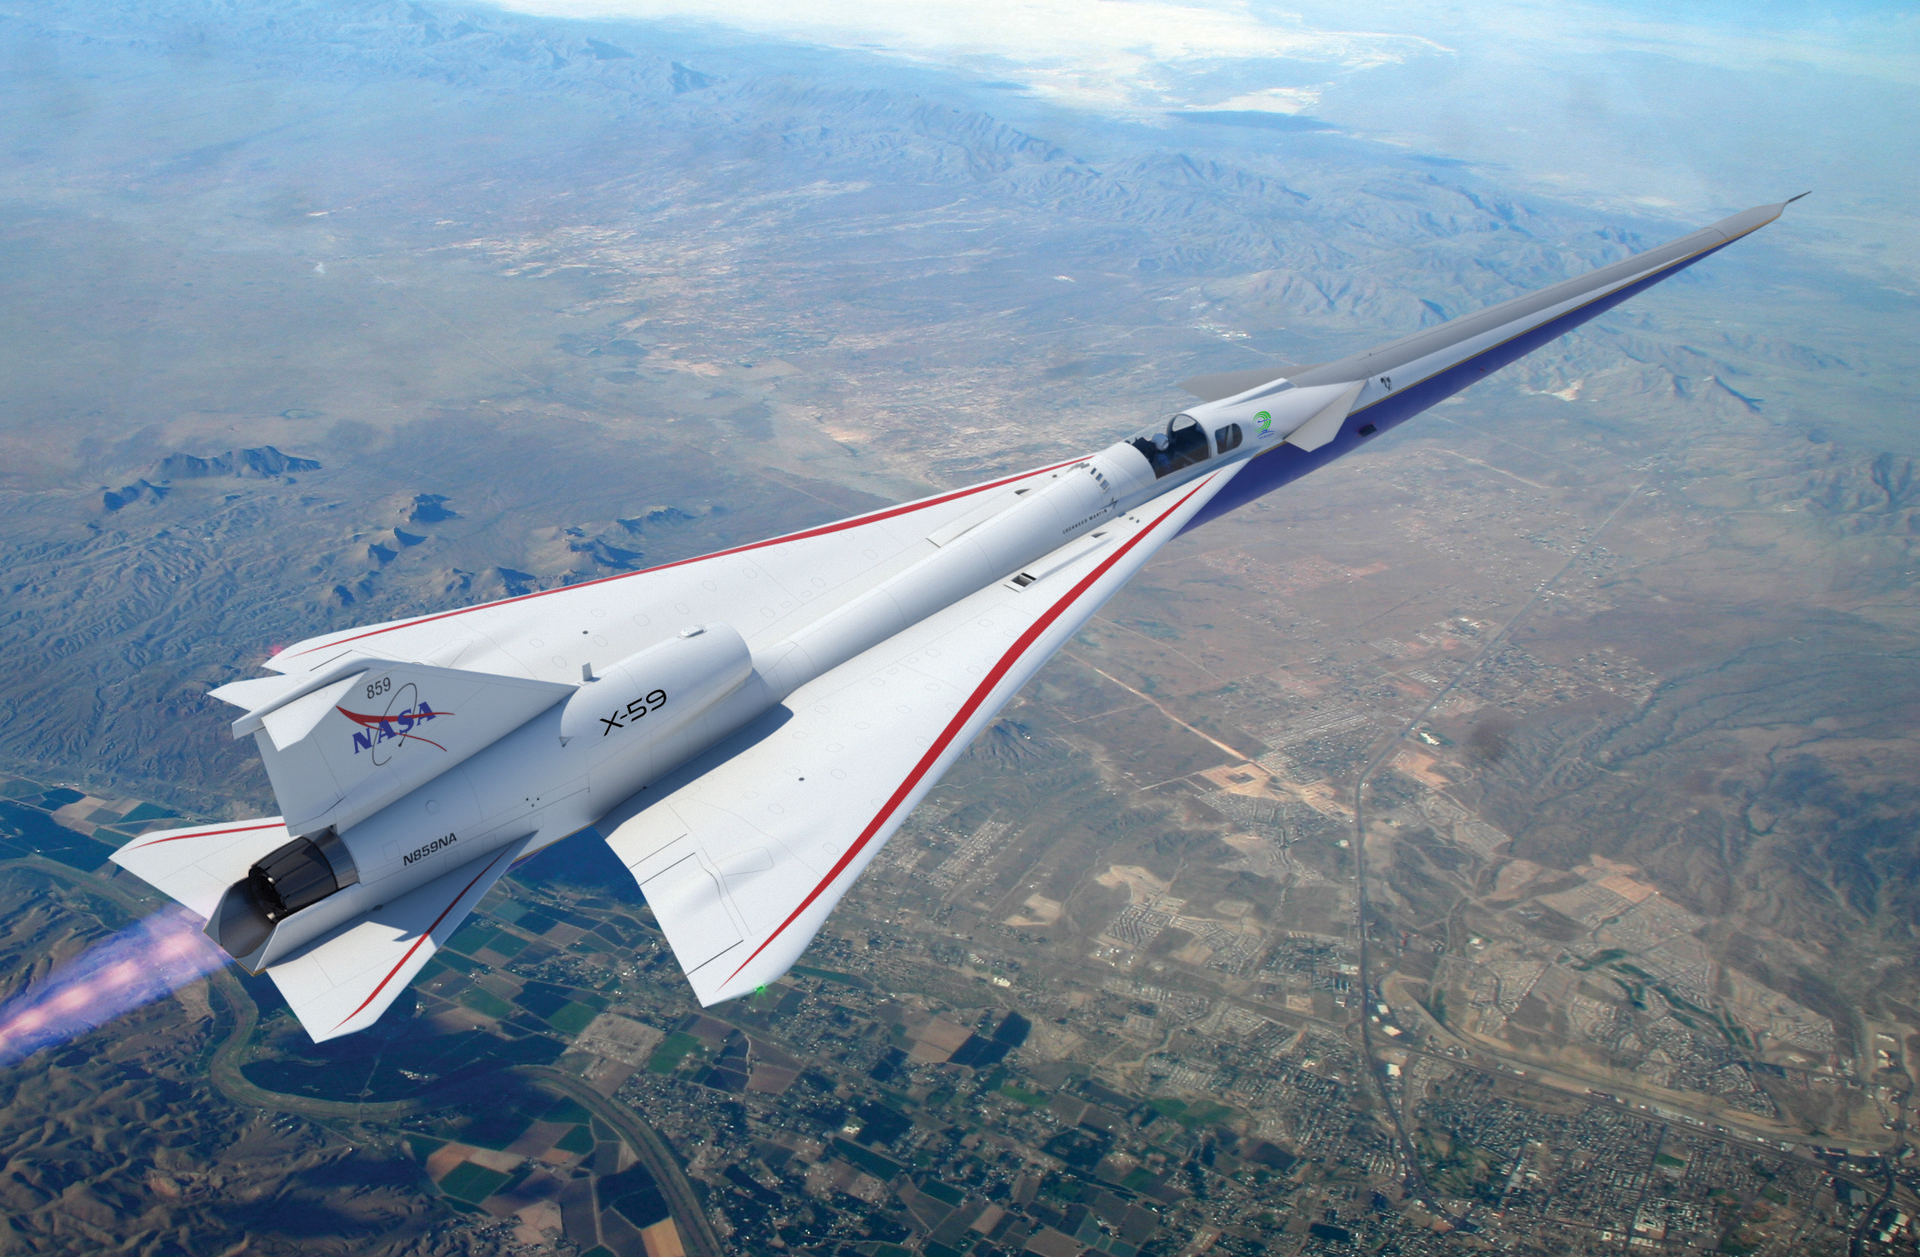 Artist illustration of the X-59 aircraft in flight over land.